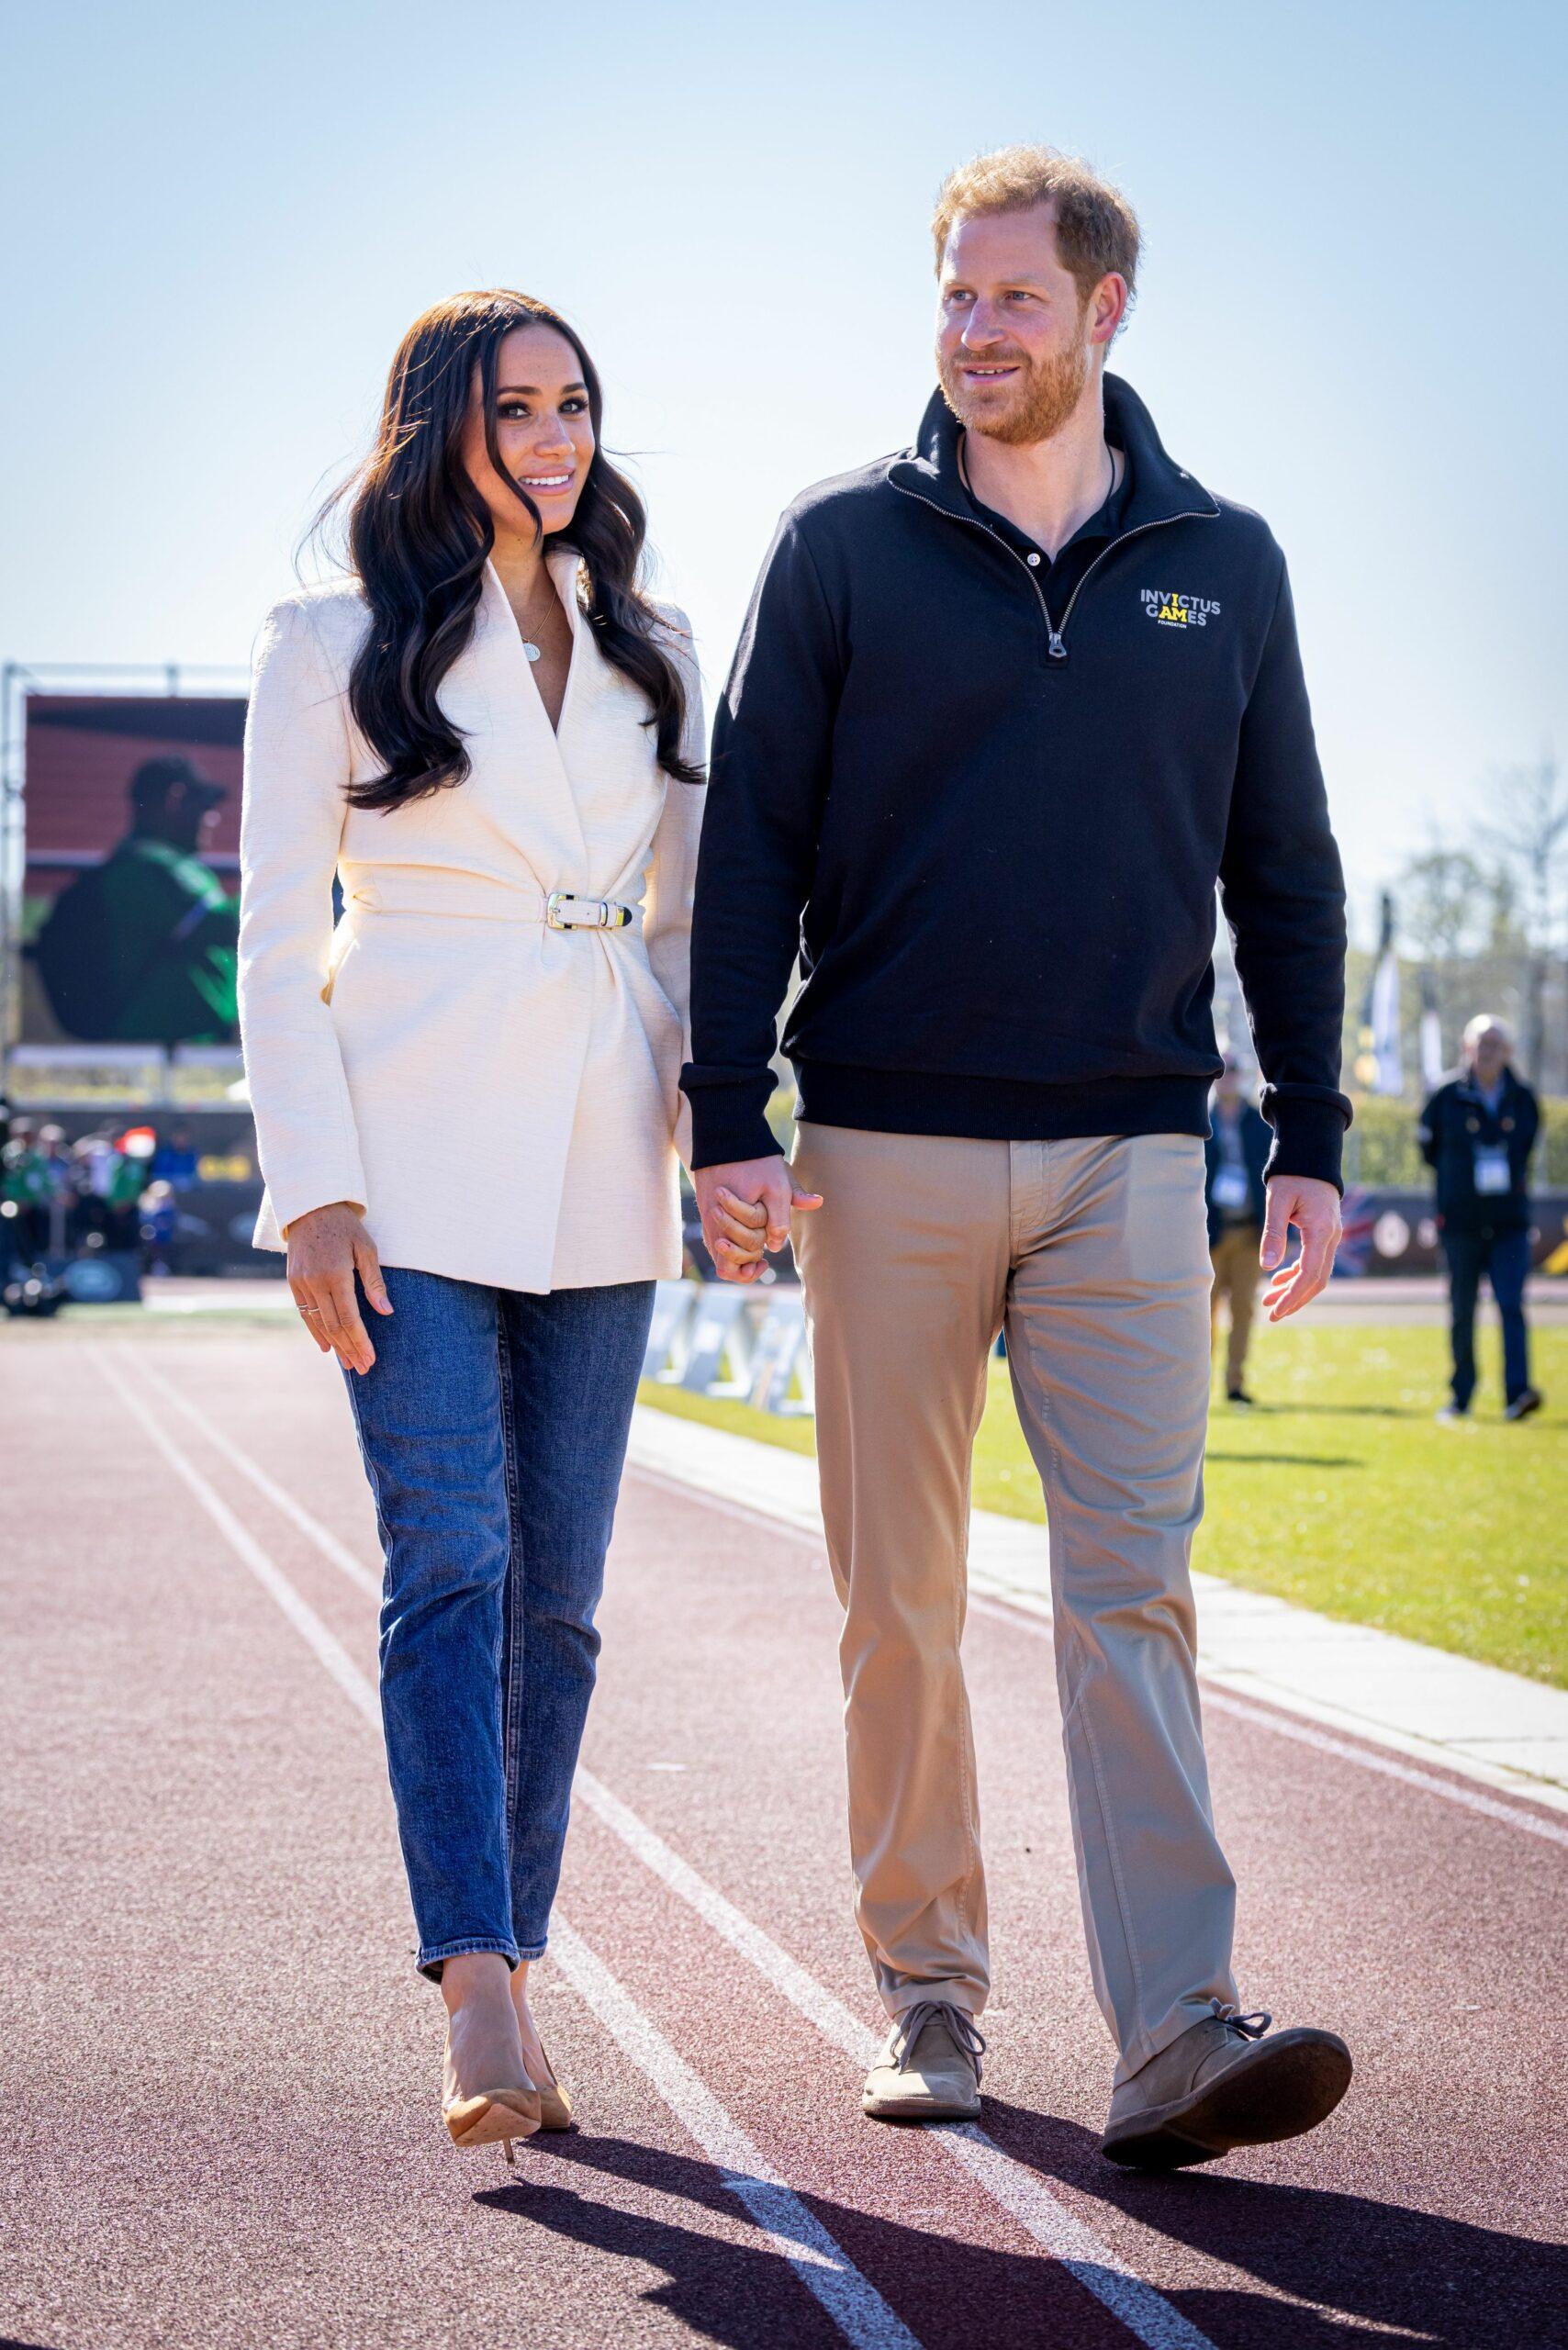 The Duke and Duchess of Sussex are seen at the Invictus Games in the Hague Holland